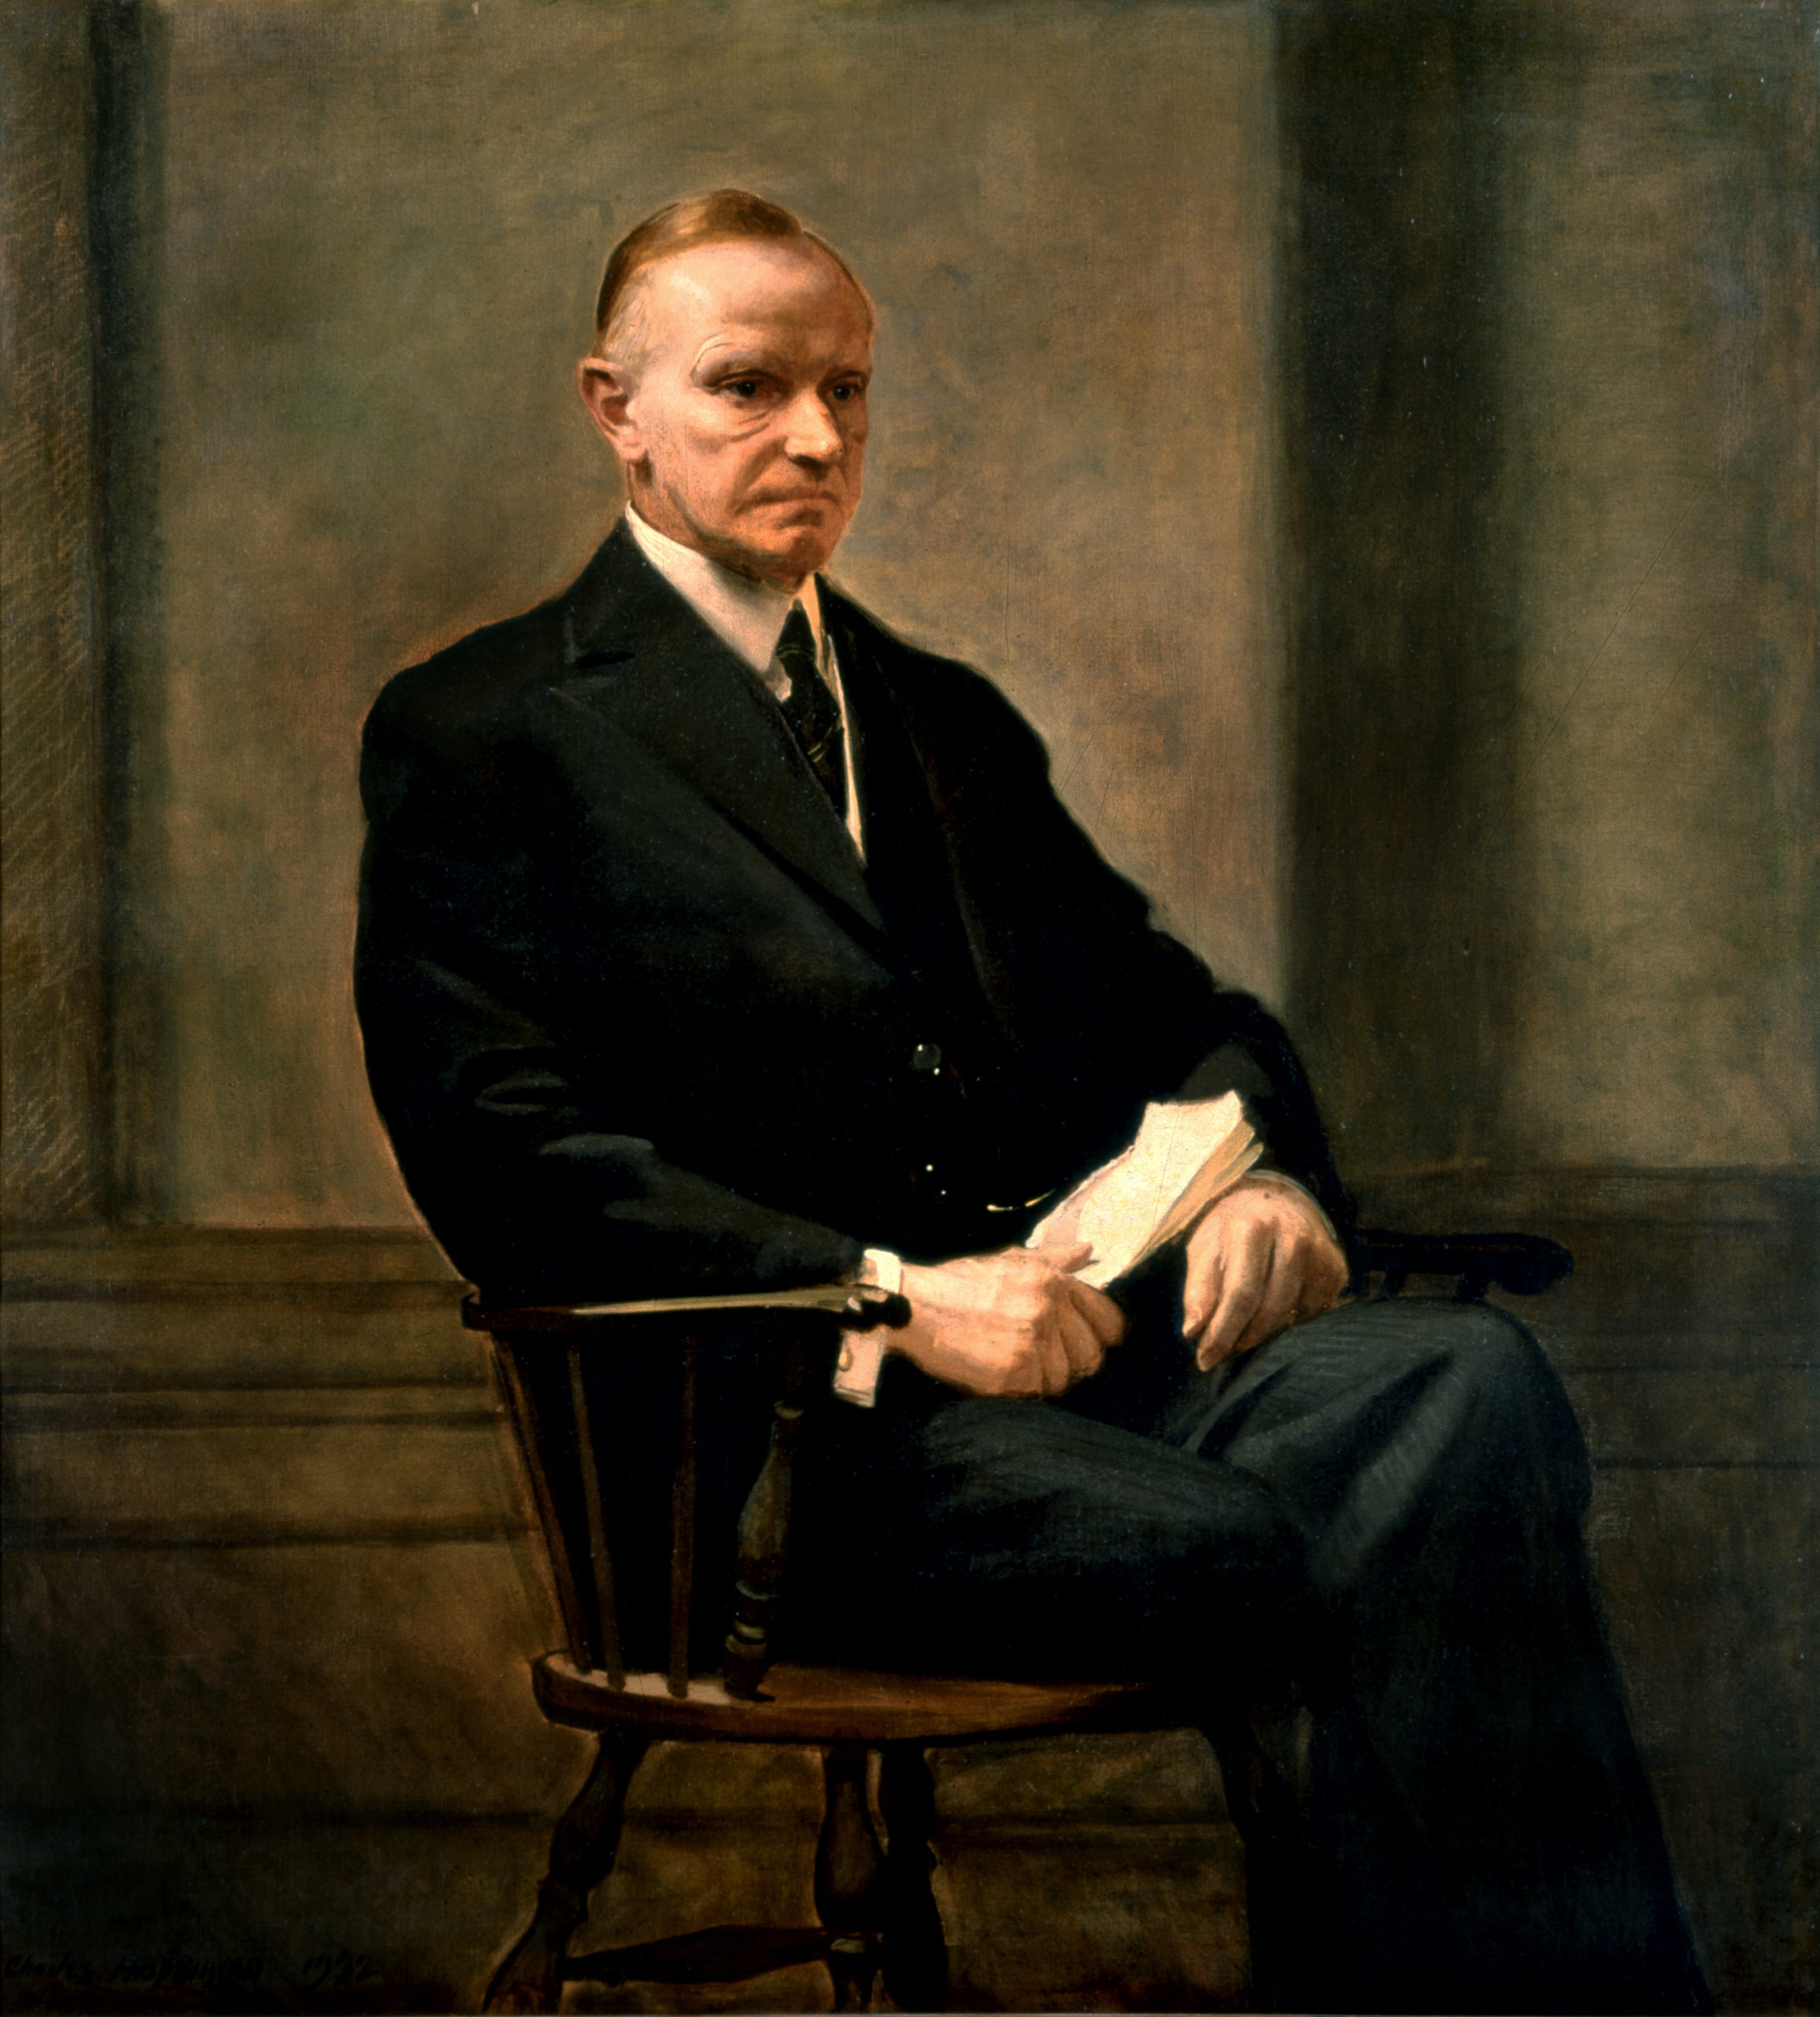 Official Presidential portrait of Calvin Coolidge